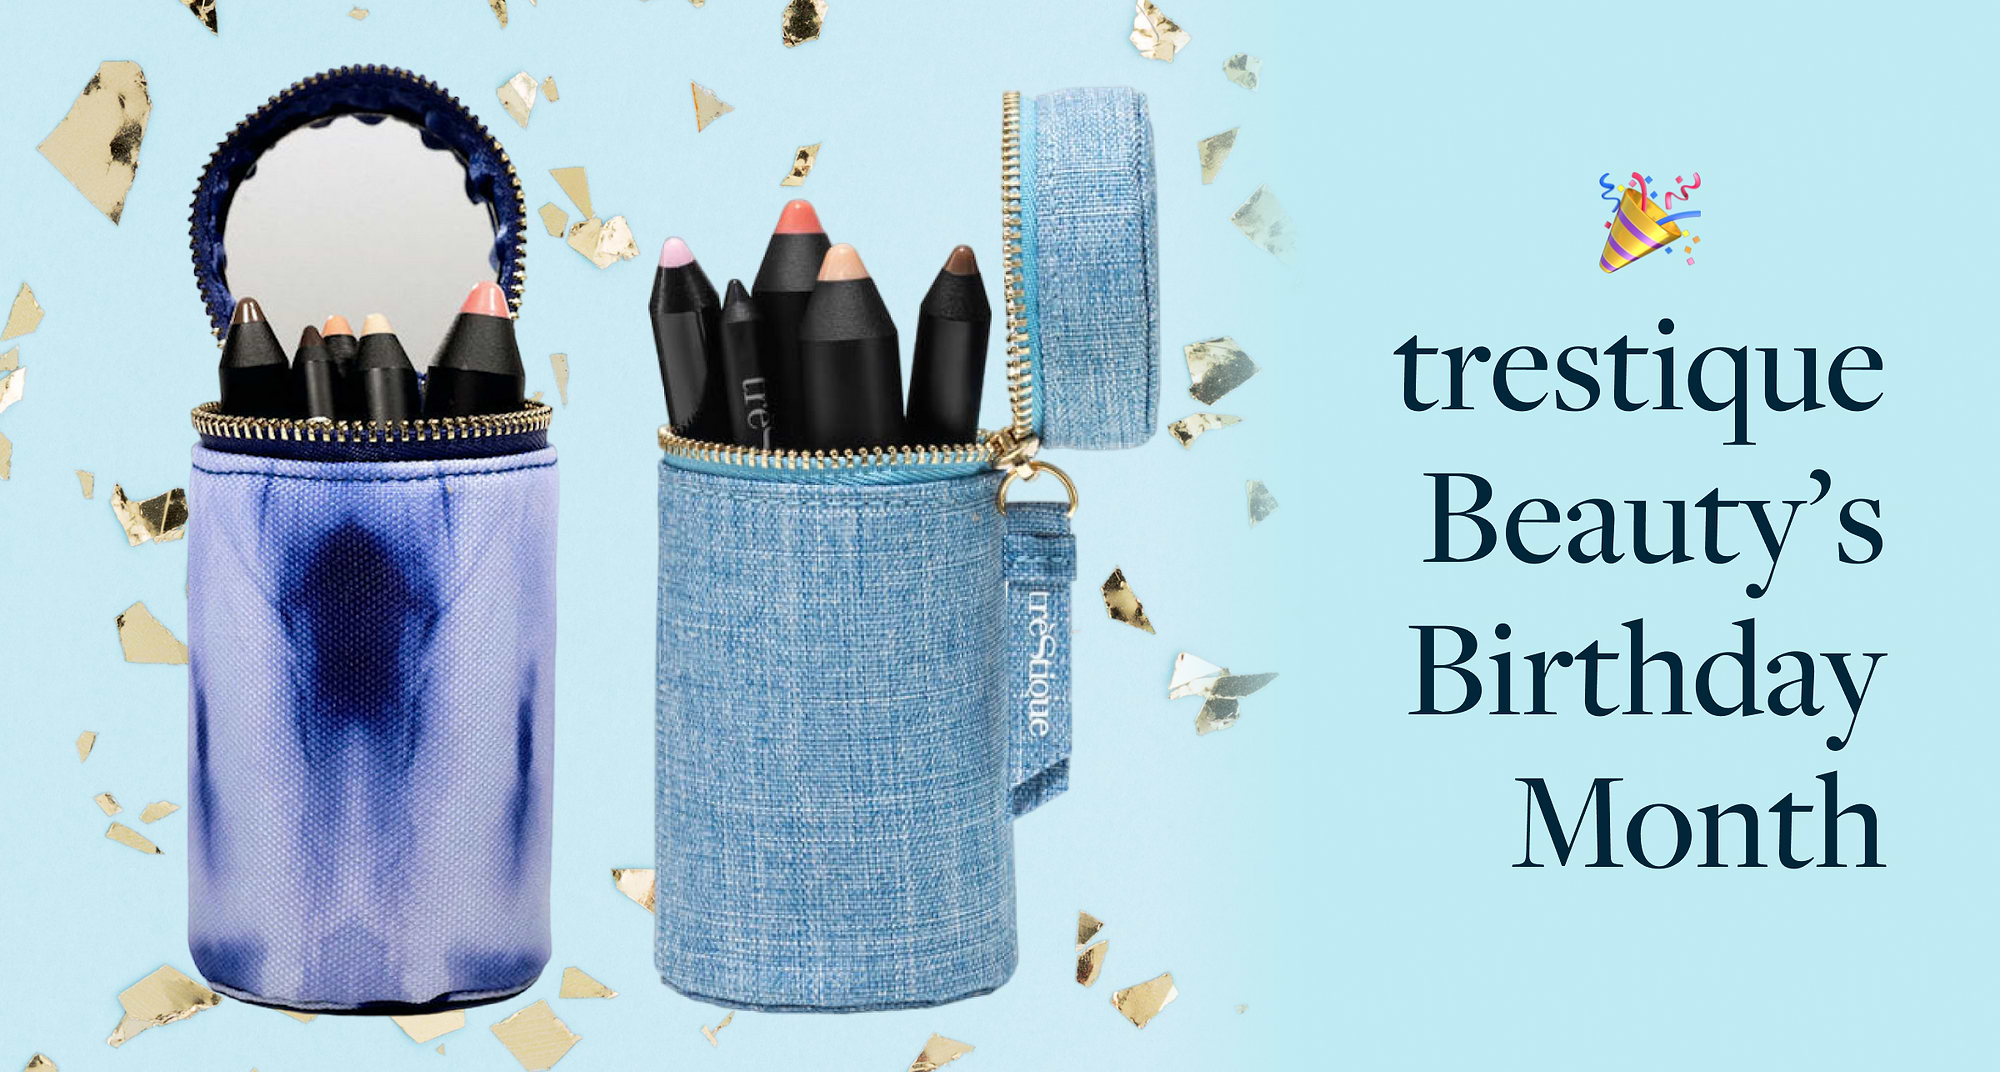 trestique Beauty’s Birthday Month: From Day One to Our Eco-Friendly Future